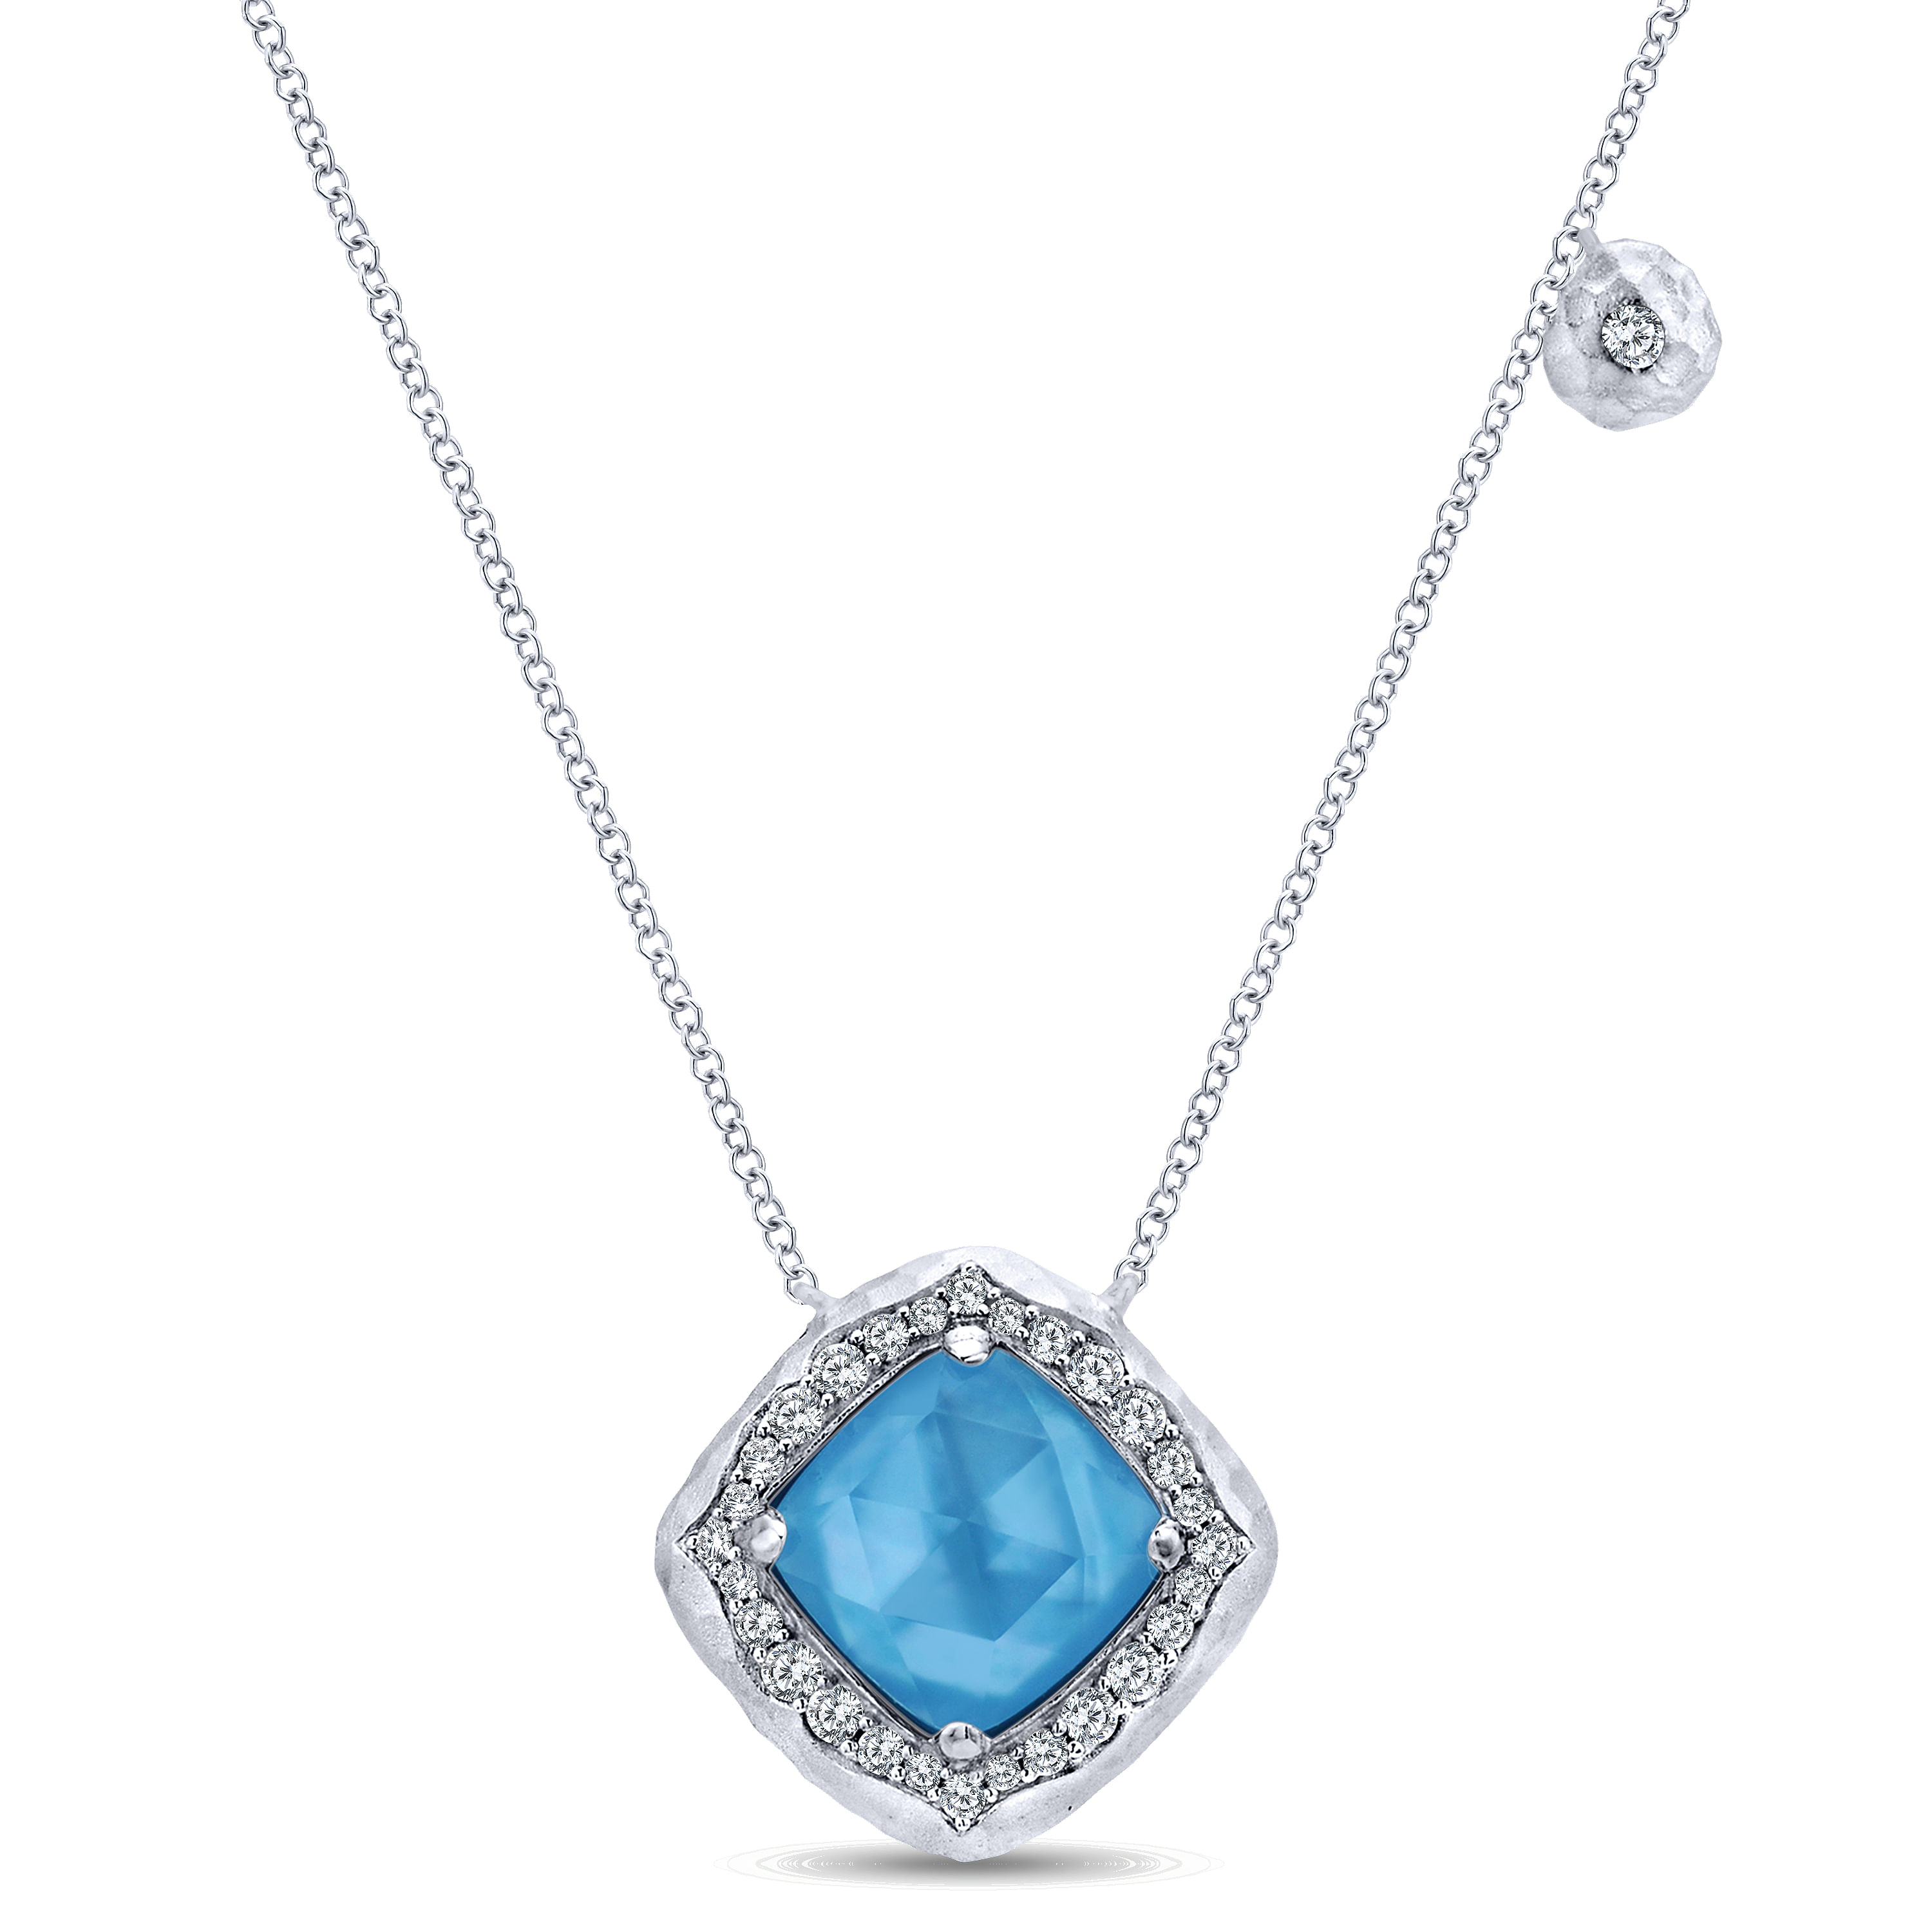 925 Sterling Silver Hammered Rock Crystal/White MOP/Turquoise and White Sapphire Pendant Necklace